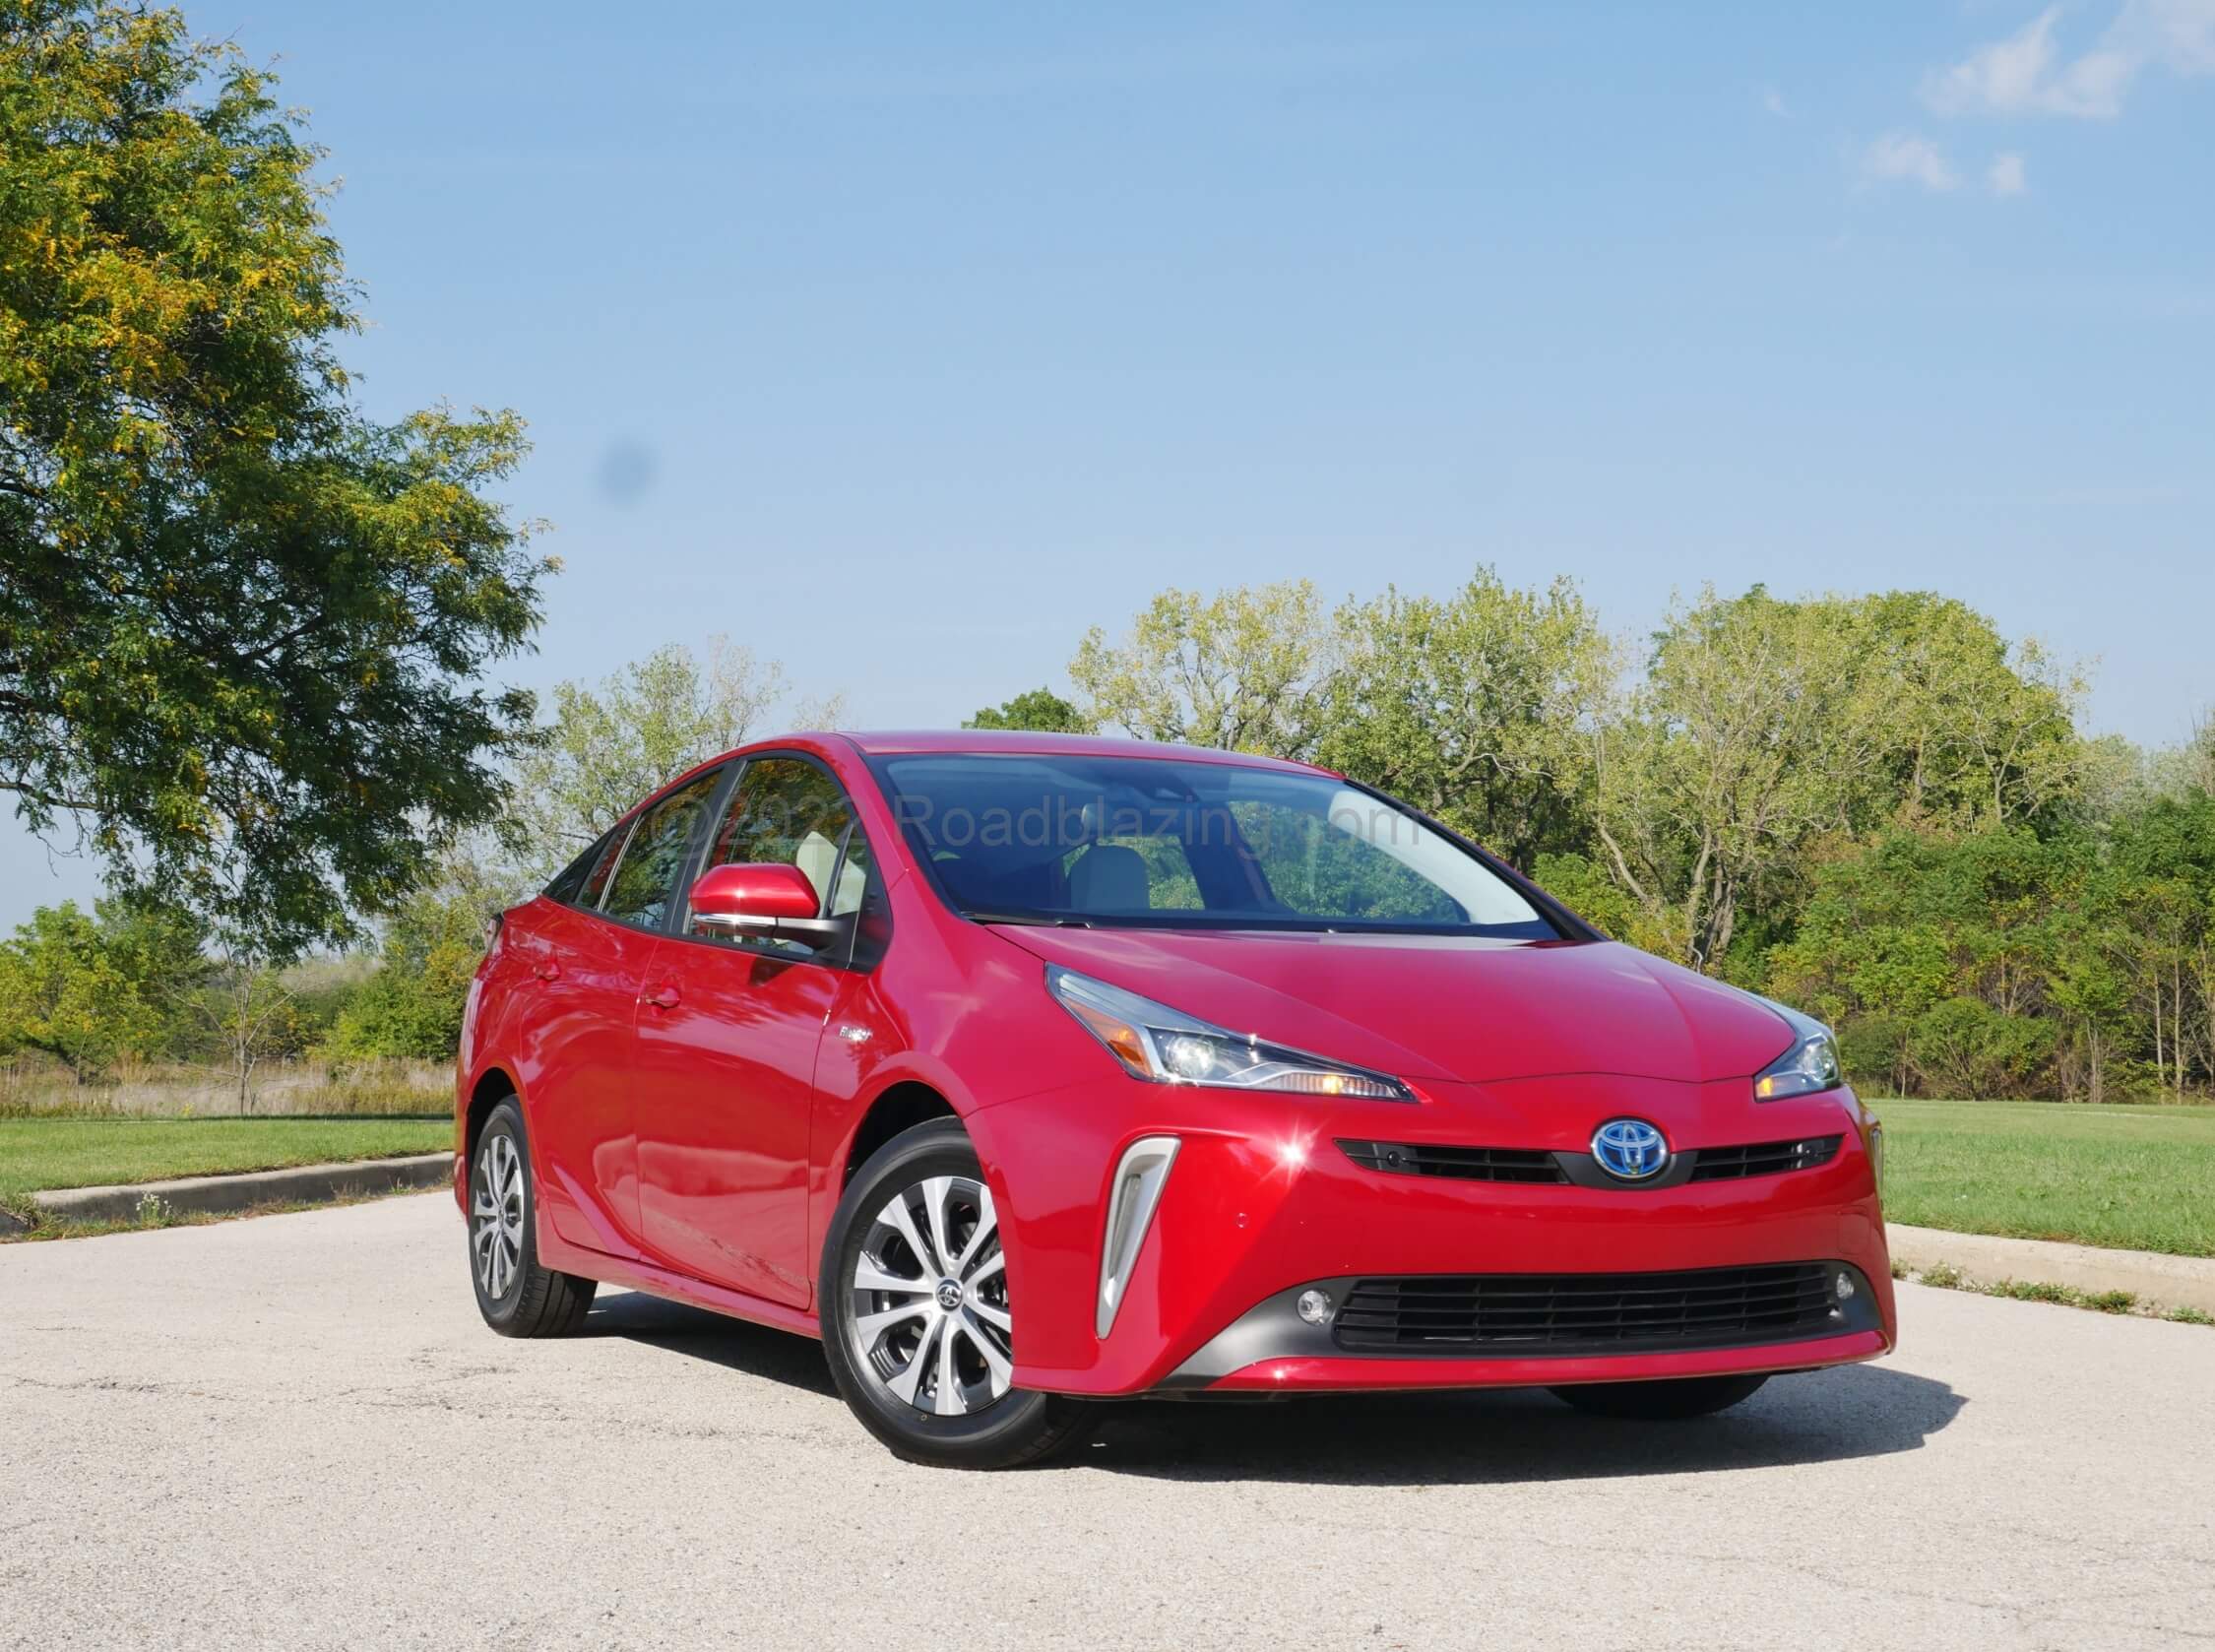 2022 Toyota Prius XLE AWD-e: There is now a discernible "Point" to the nose, with jazzier vertical fangs